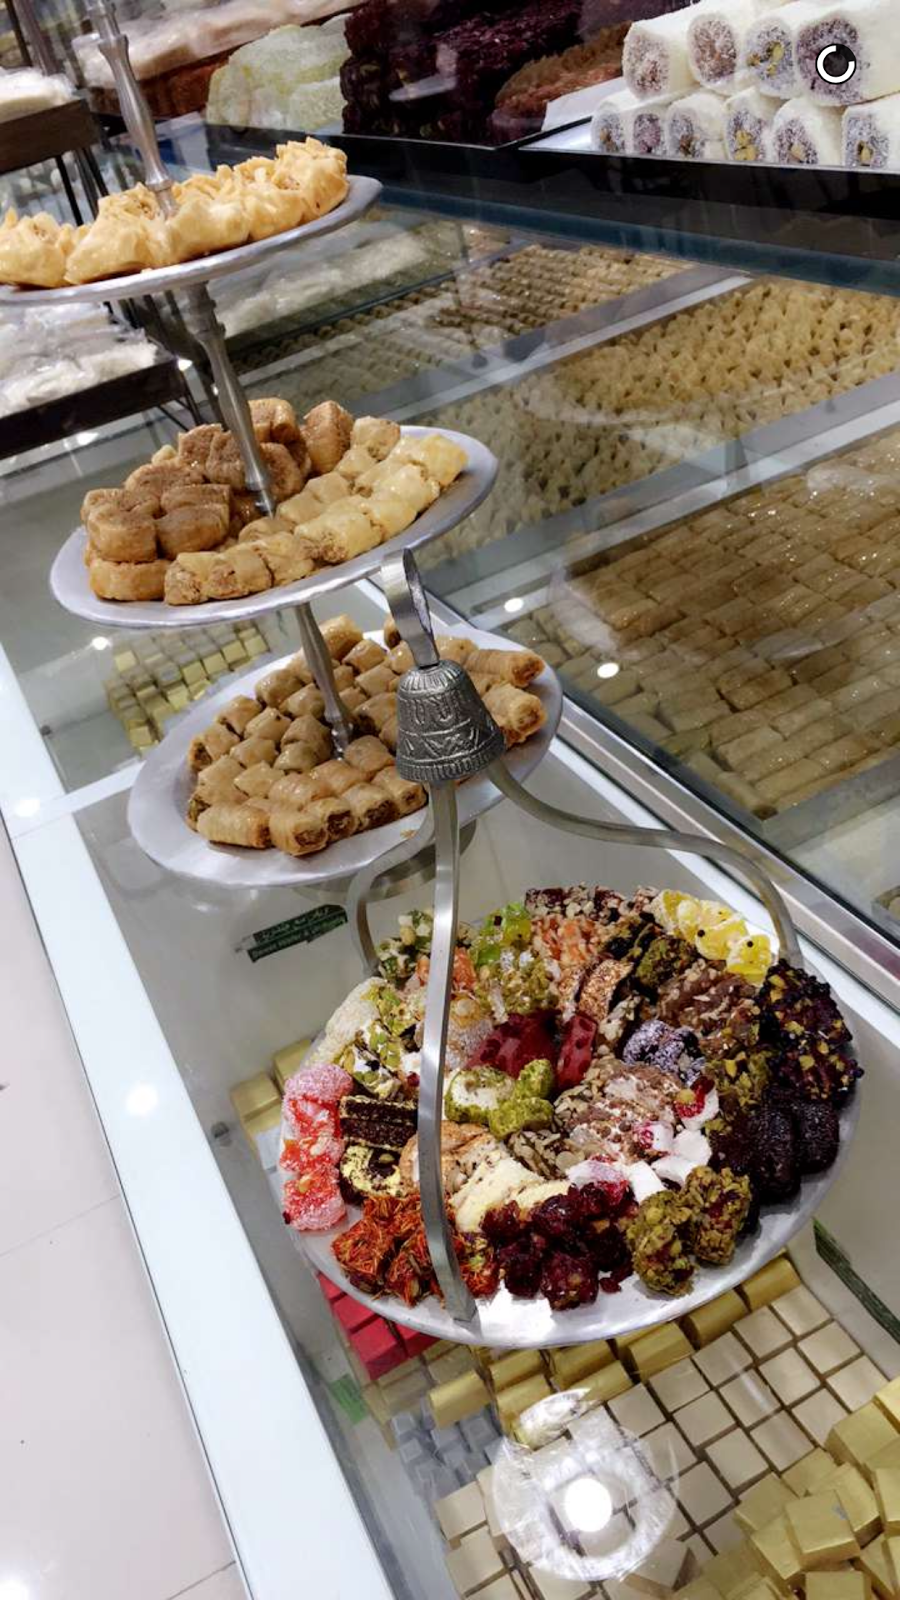 Medina Sweets | restaurant | 4/340 Guildford Rd, Guildford NSW 2161, Australia | 0287473495 OR +61 2 8747 3495